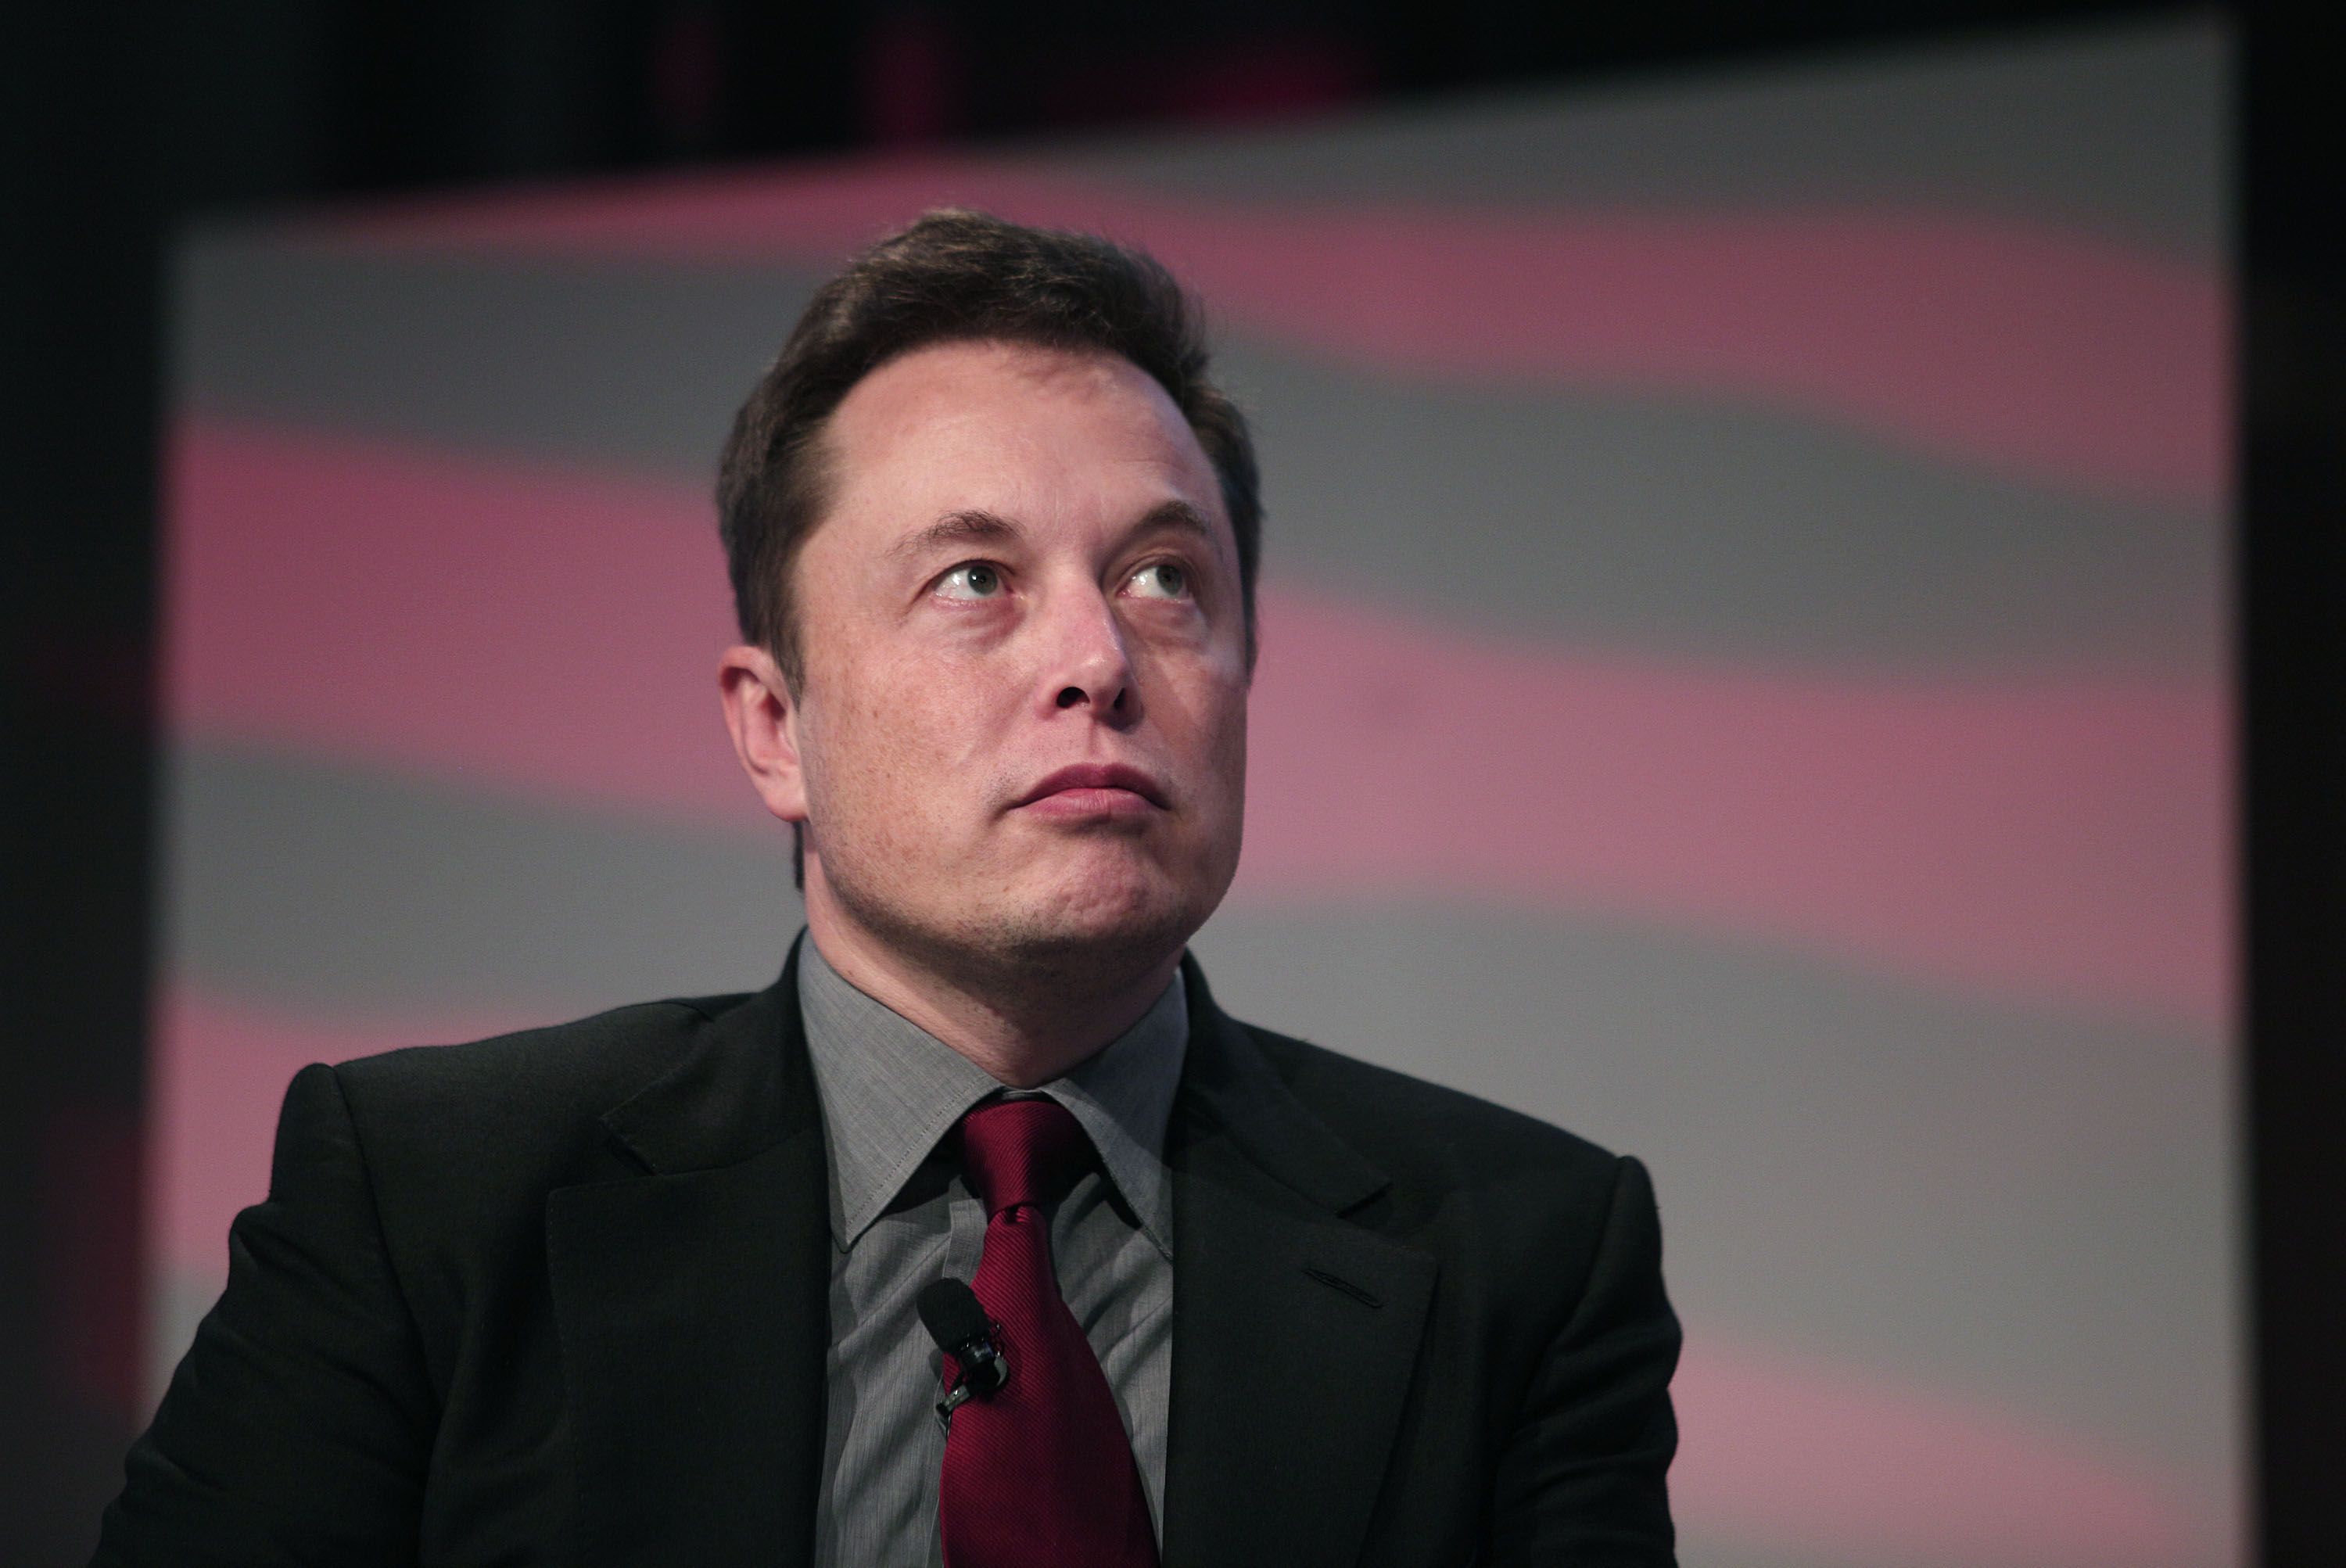 Elon Musk has agreed to step down as Tesla chairman for three years